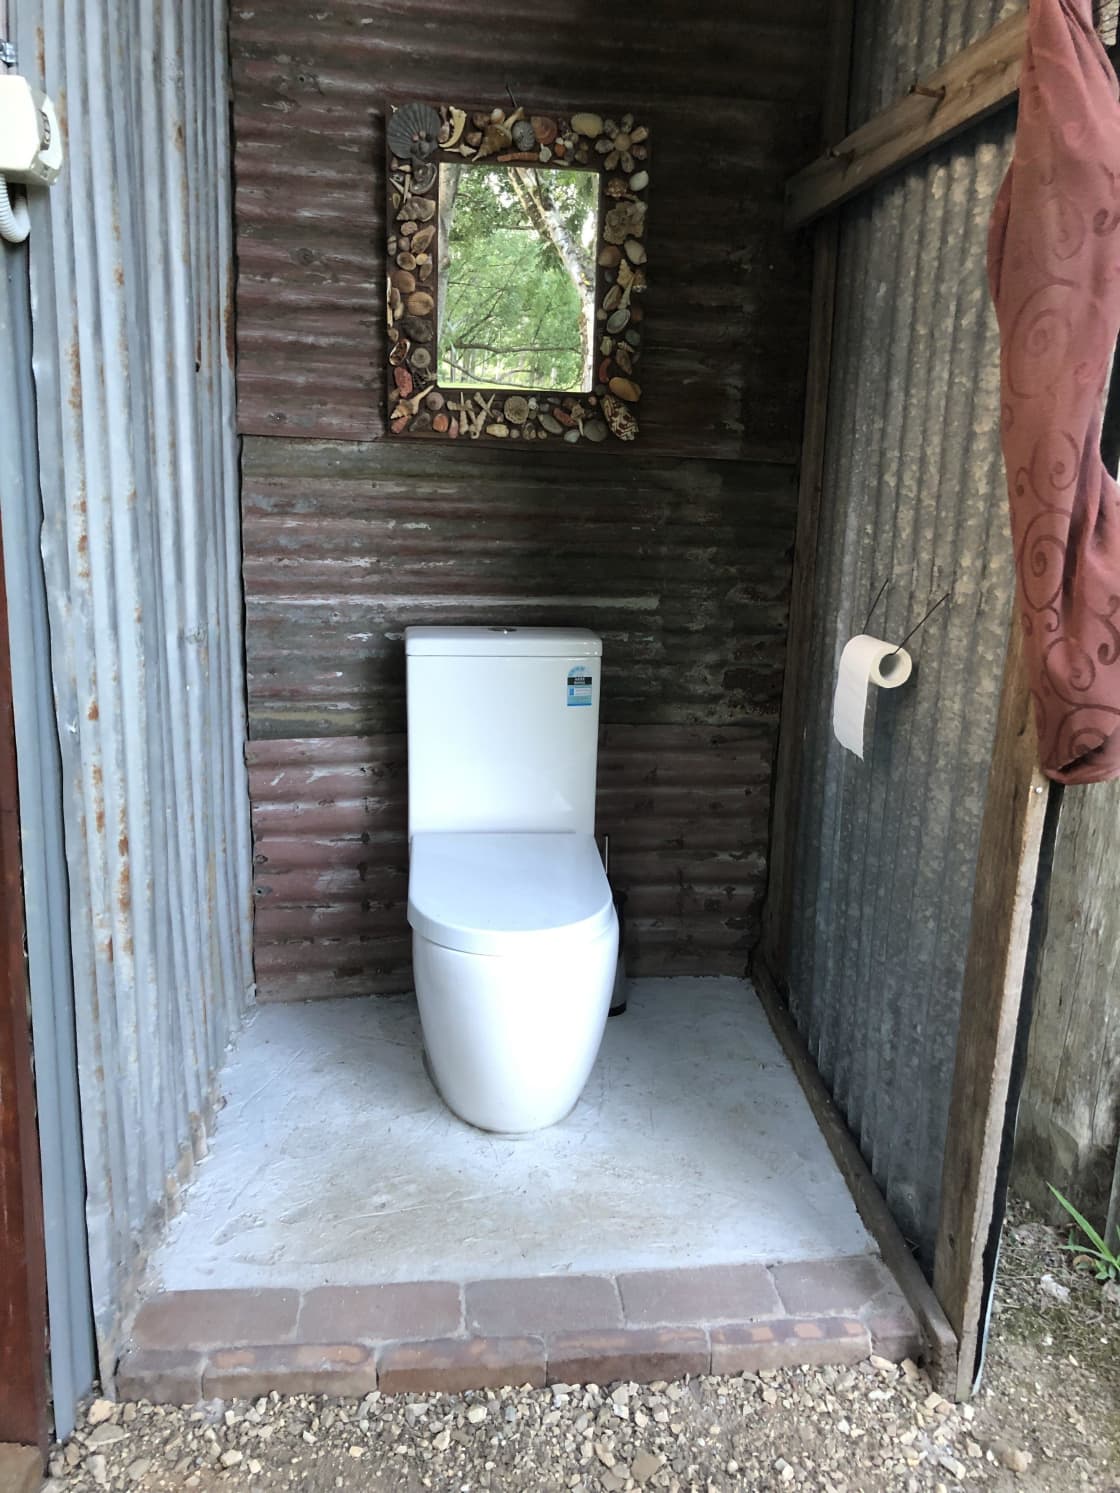 Flushing toilet for guests